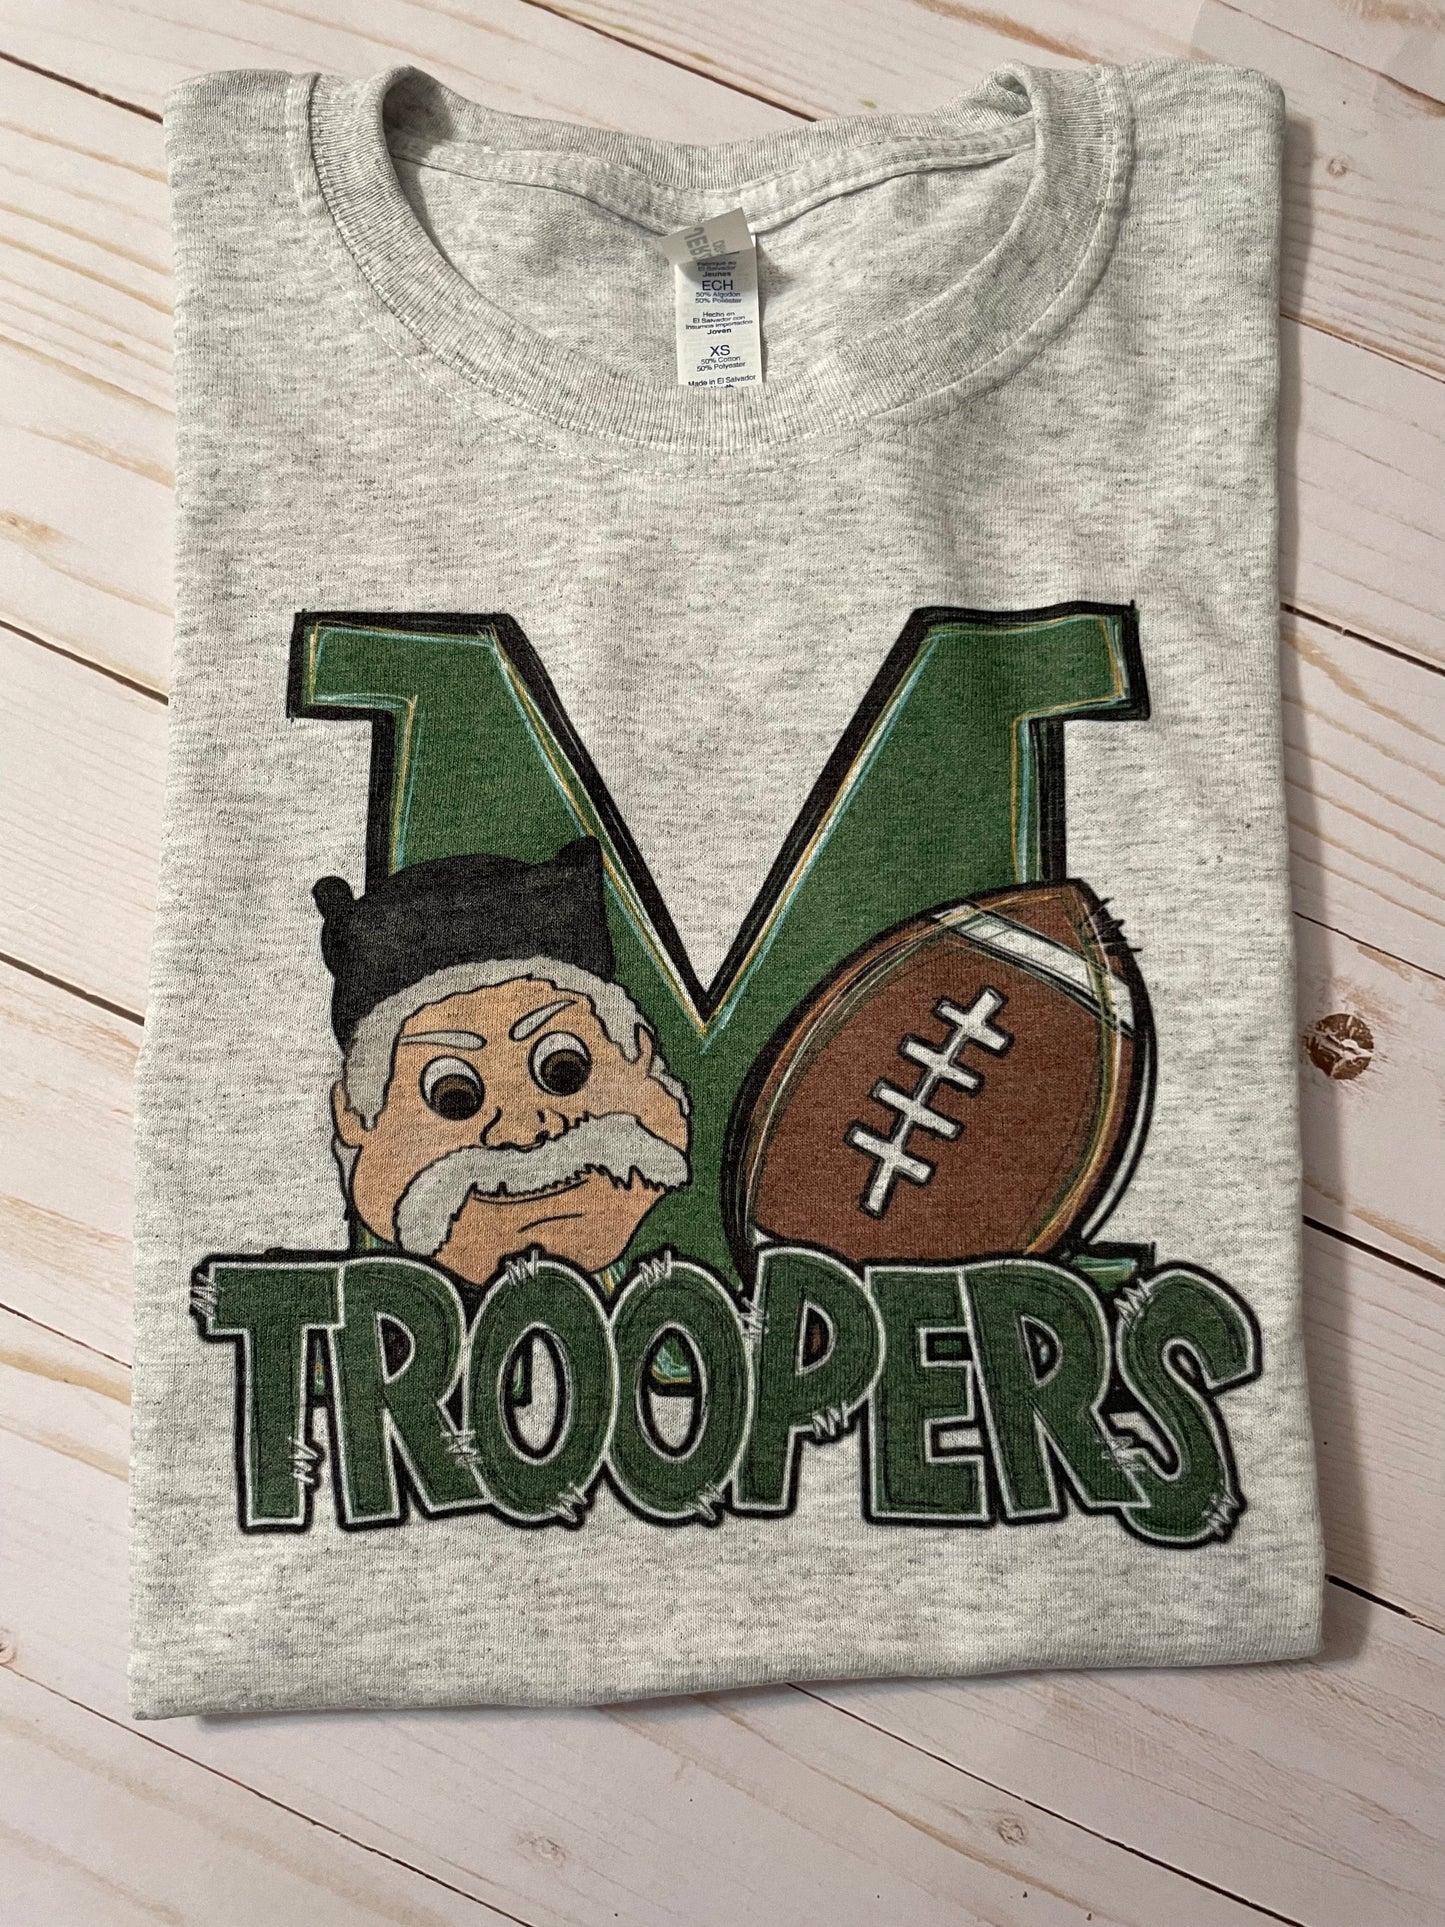 Troopers T-Shirt